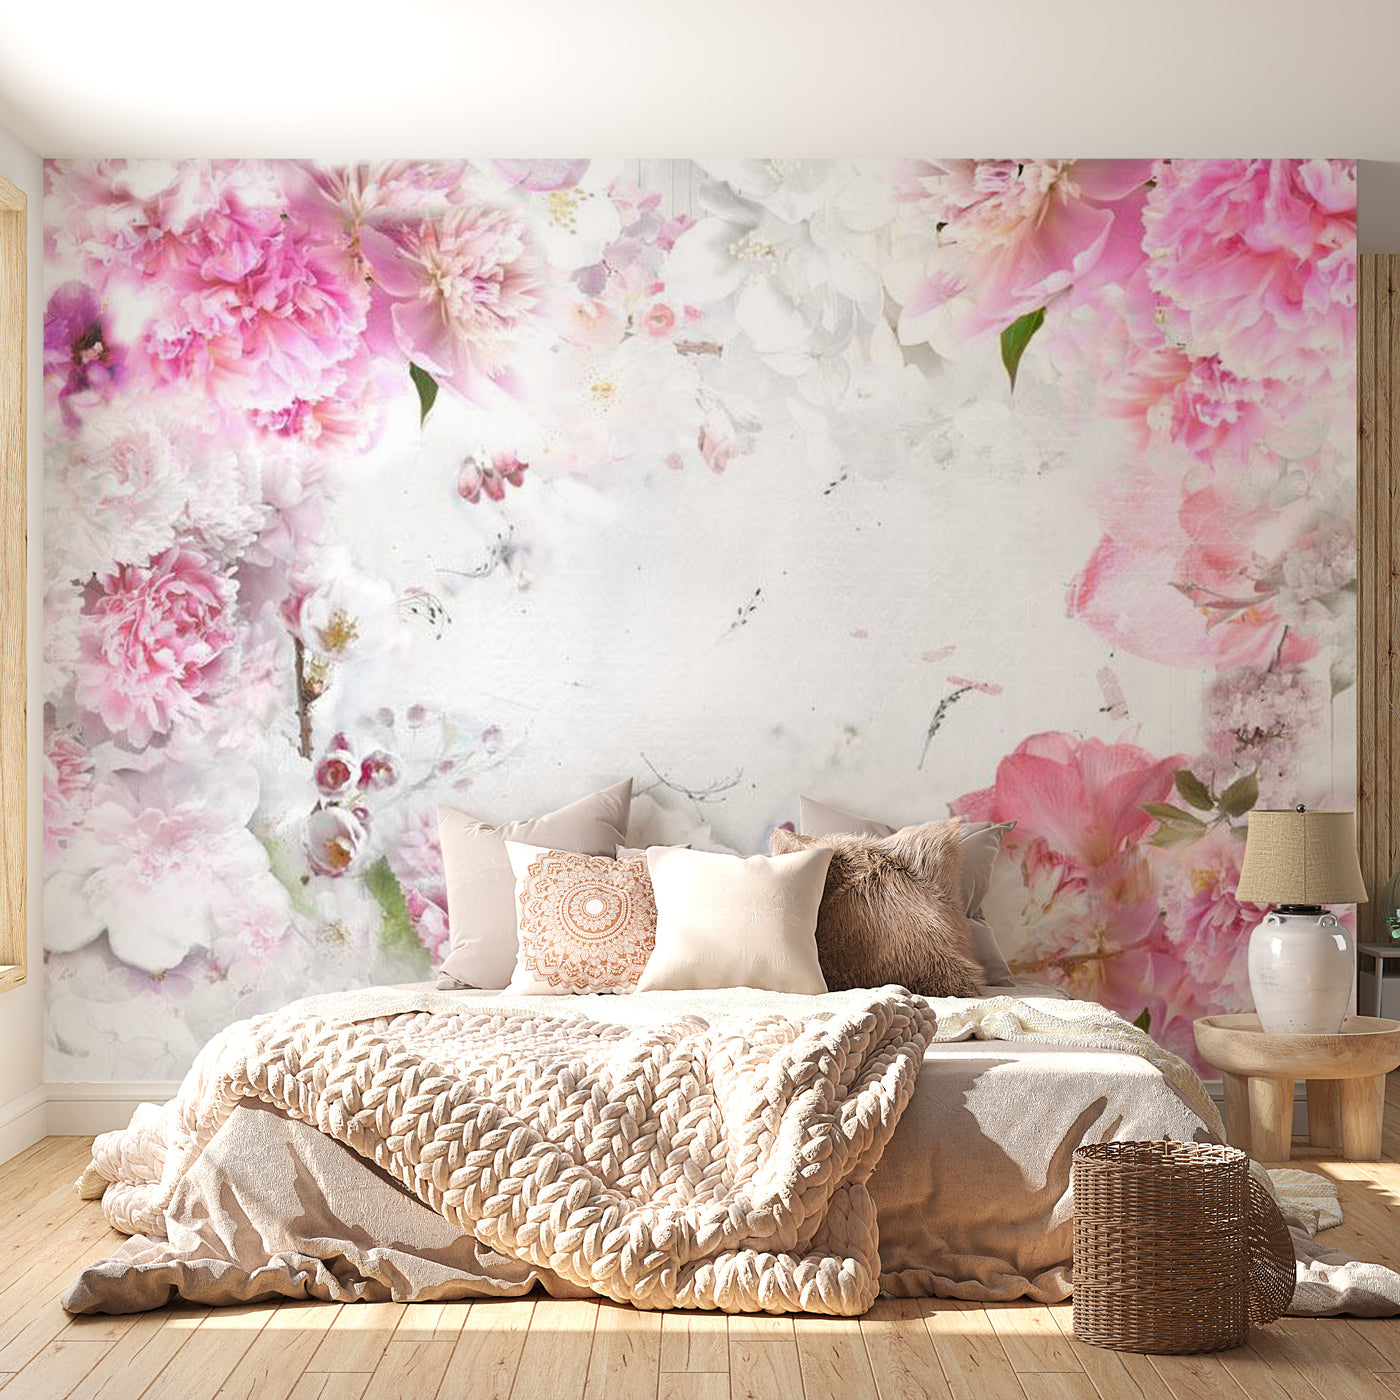 Peel & Stick Floral Wall Mural - Blossoming Hope - Removable Wall Decals